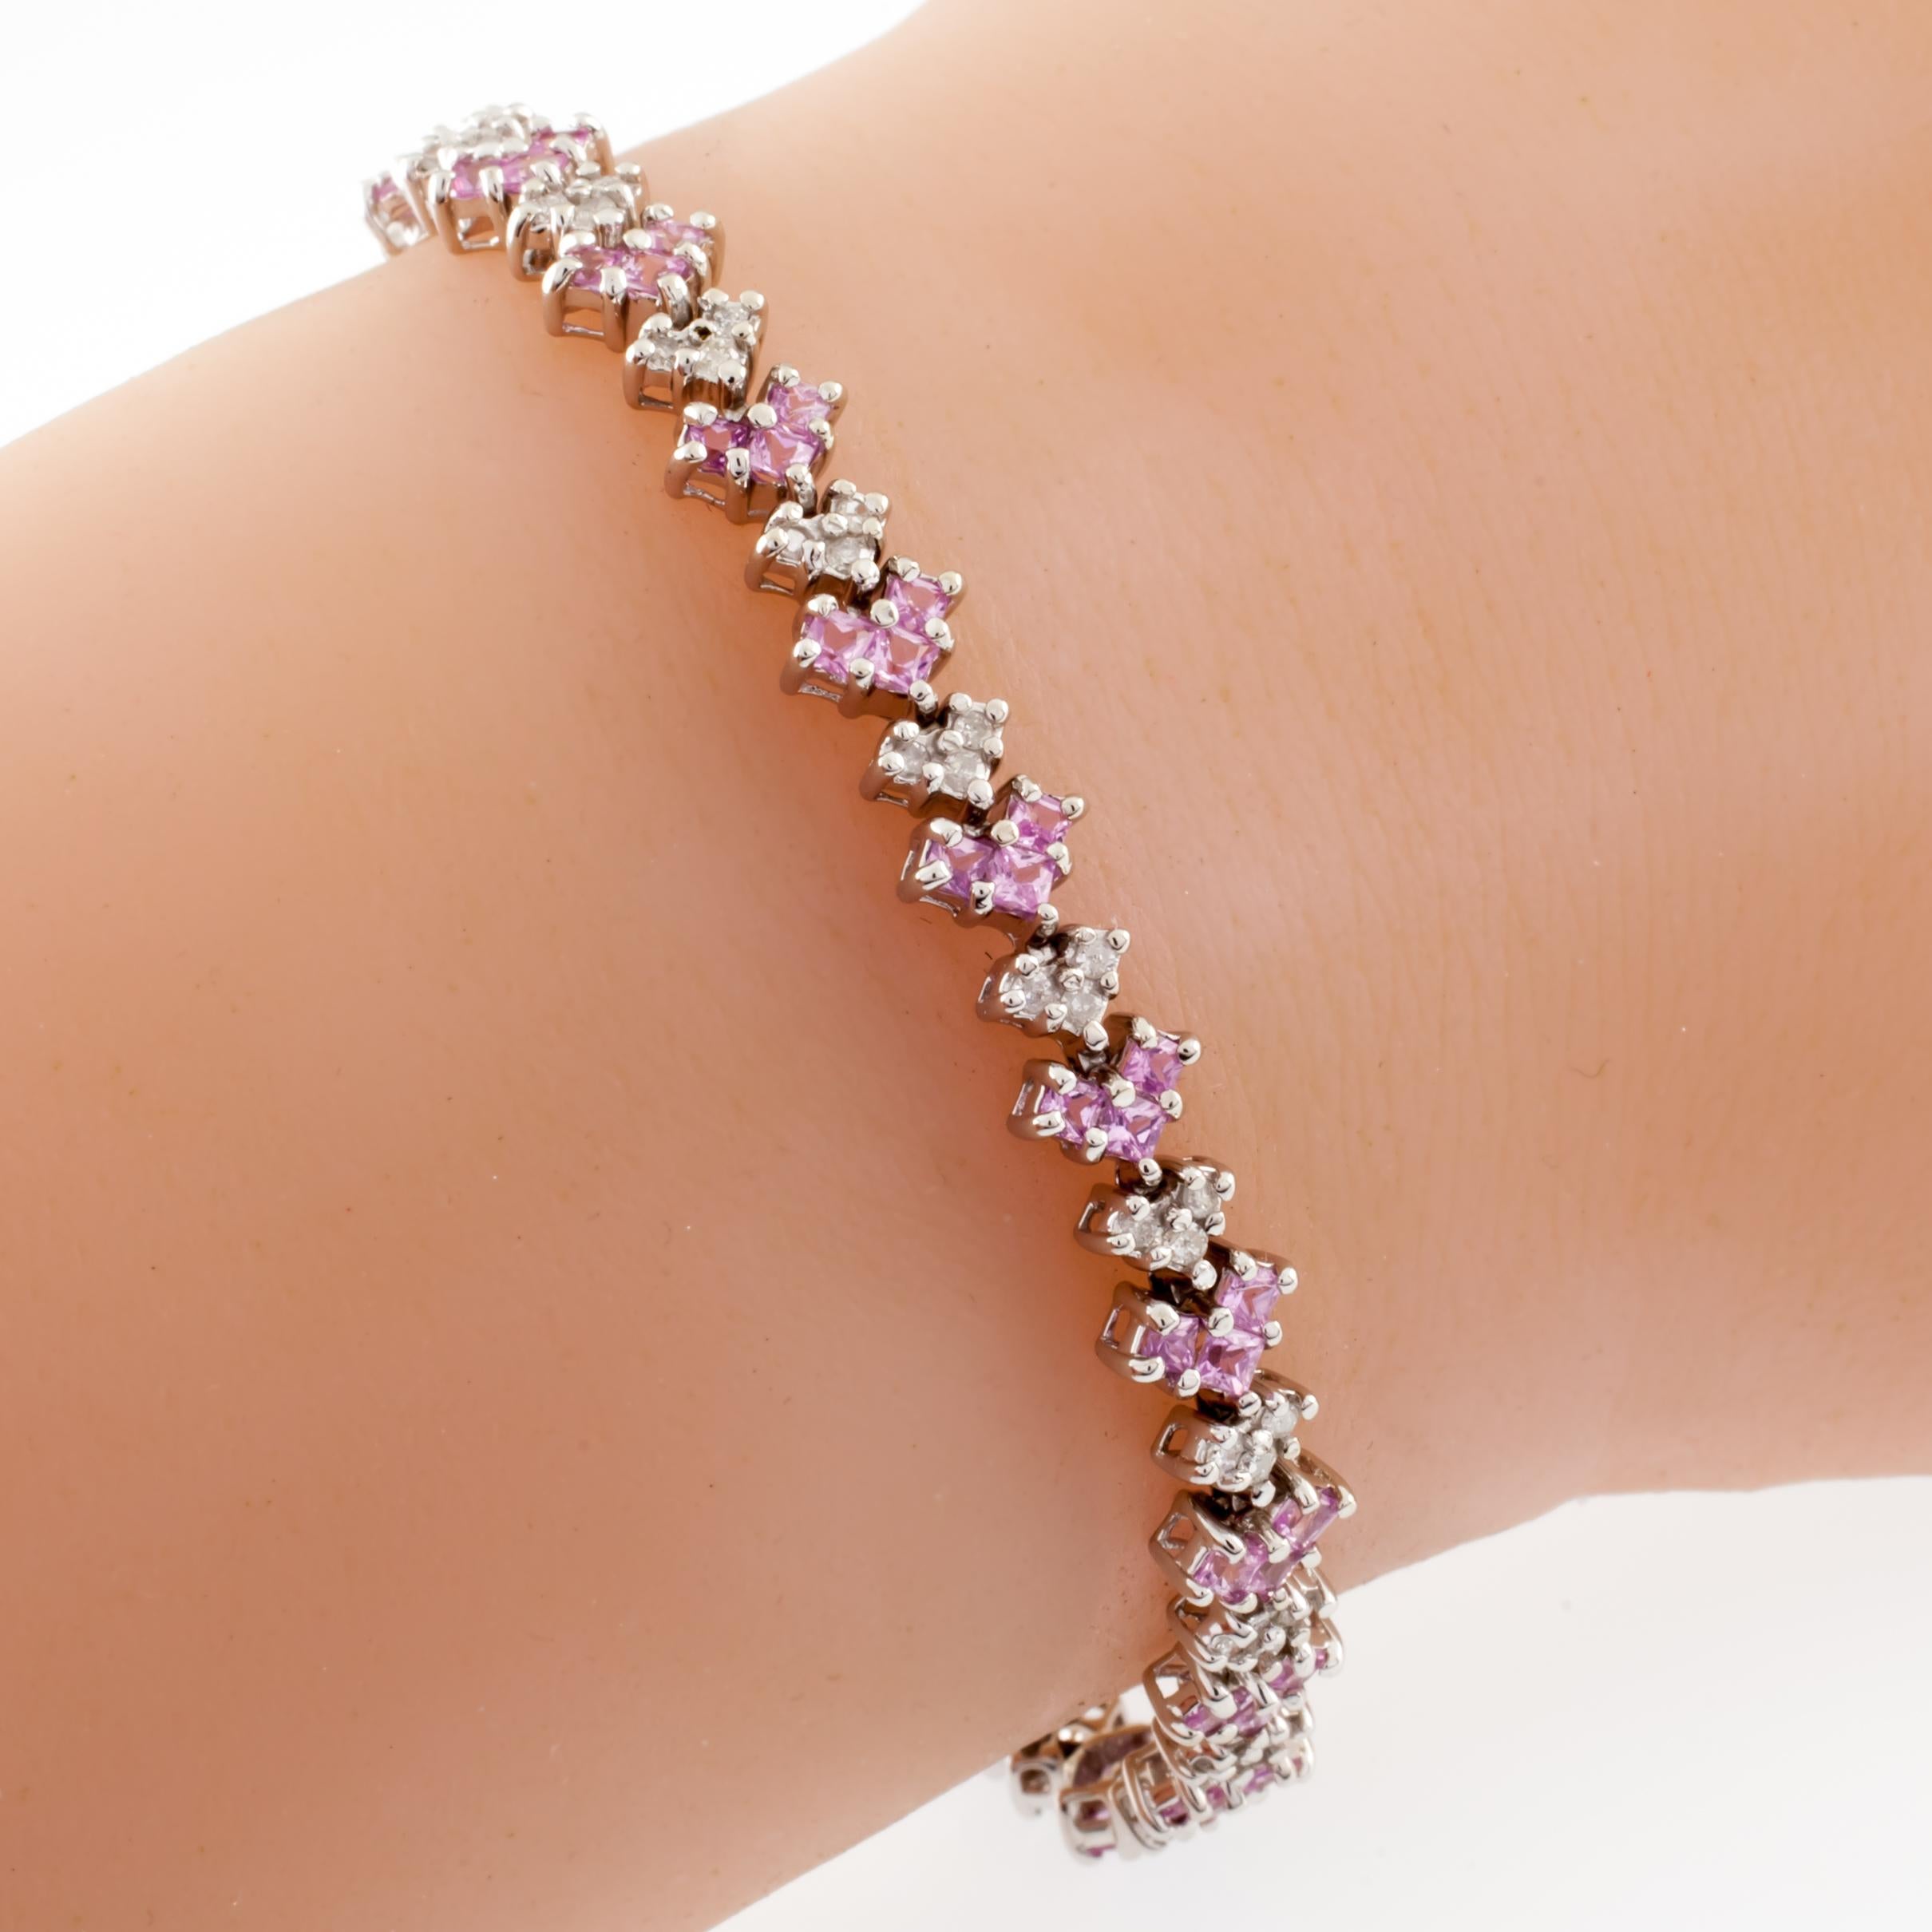 Gorgeous 10k White Gold Bracelet
Features Alternating Heart-Shaped Florets of Diamond and Pink Amethyst
Cushion Cut Amethyst & Round Cut Diamond
Total Amethyst Weight = Appx 6.90 ct
Total Diamond Weight = Appx 1.38 ct.
Average Color = I - J